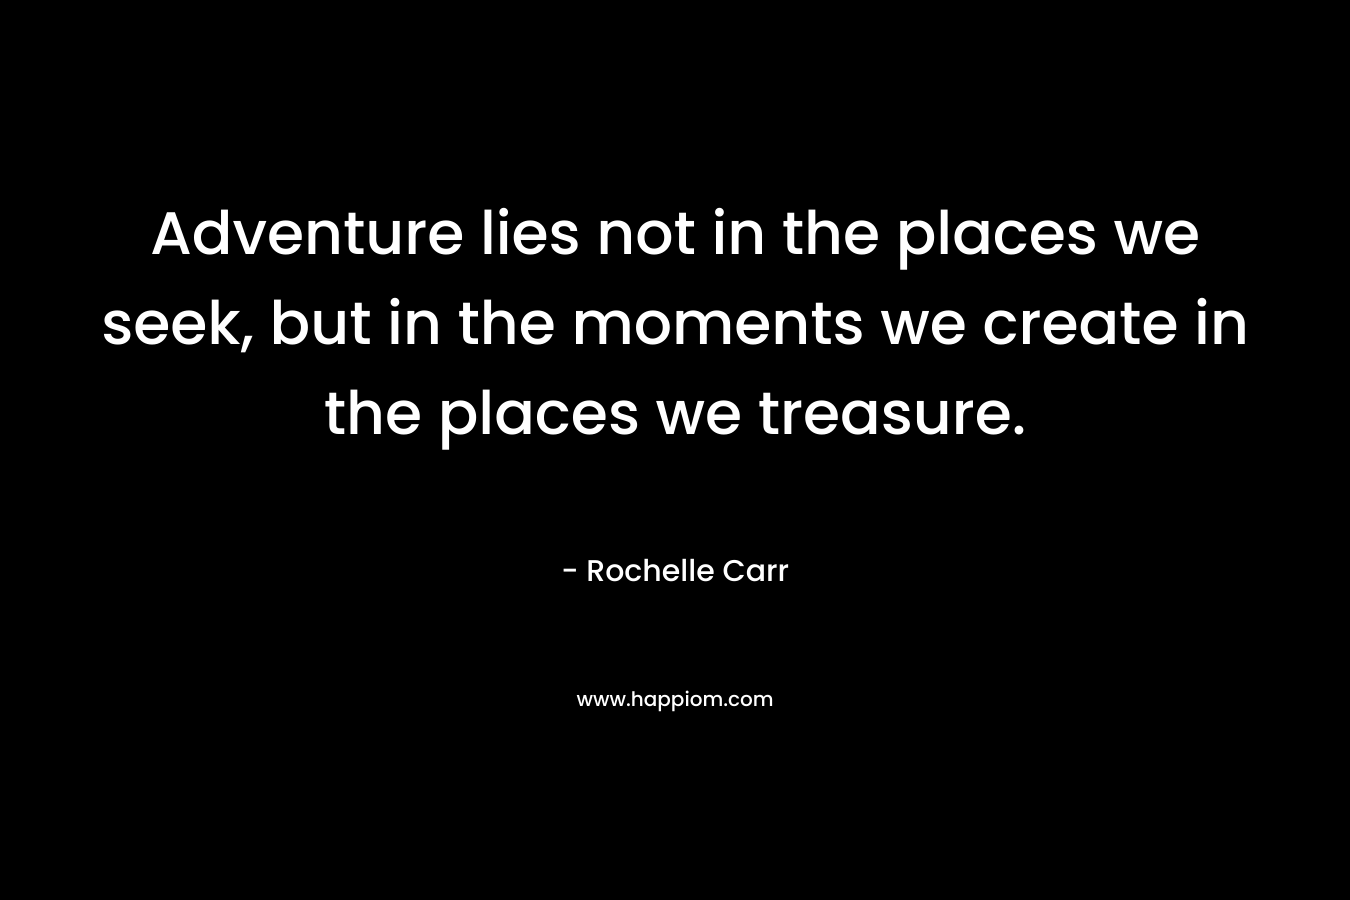 Adventure lies not in the places we seek, but in the moments we create in the places we treasure.